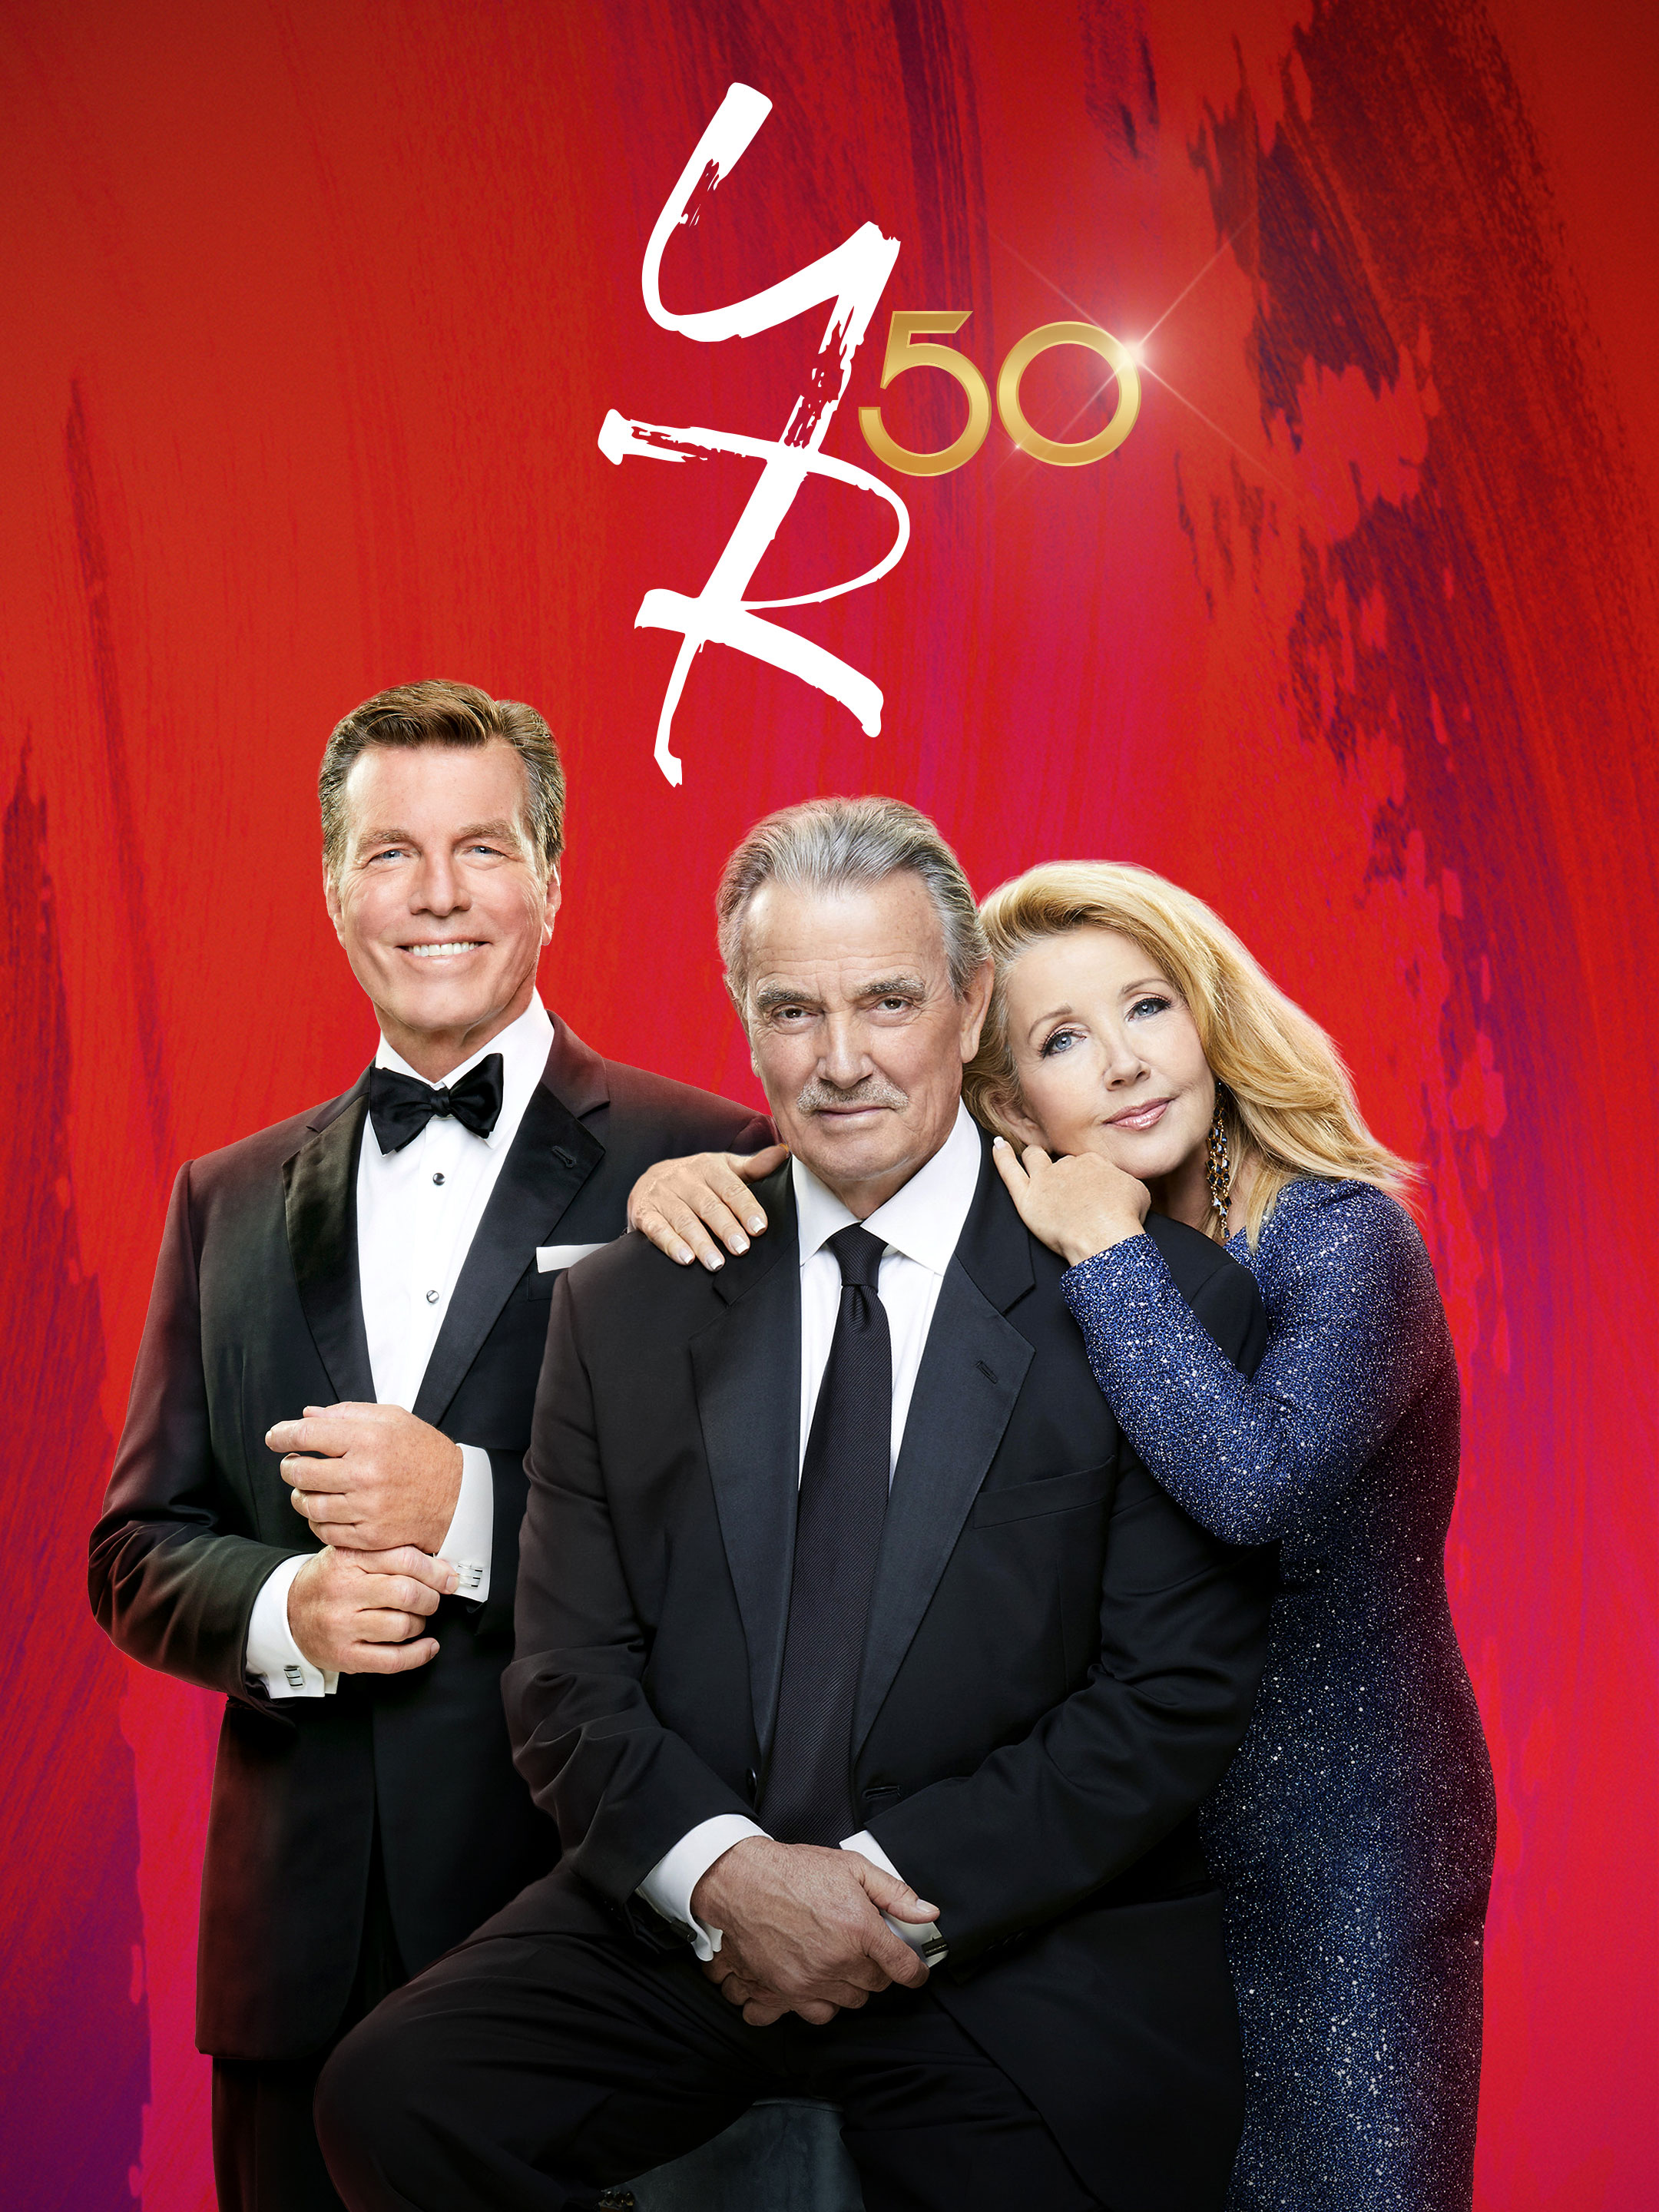 The Young and the Restless Full Cast & Crew TV Guide